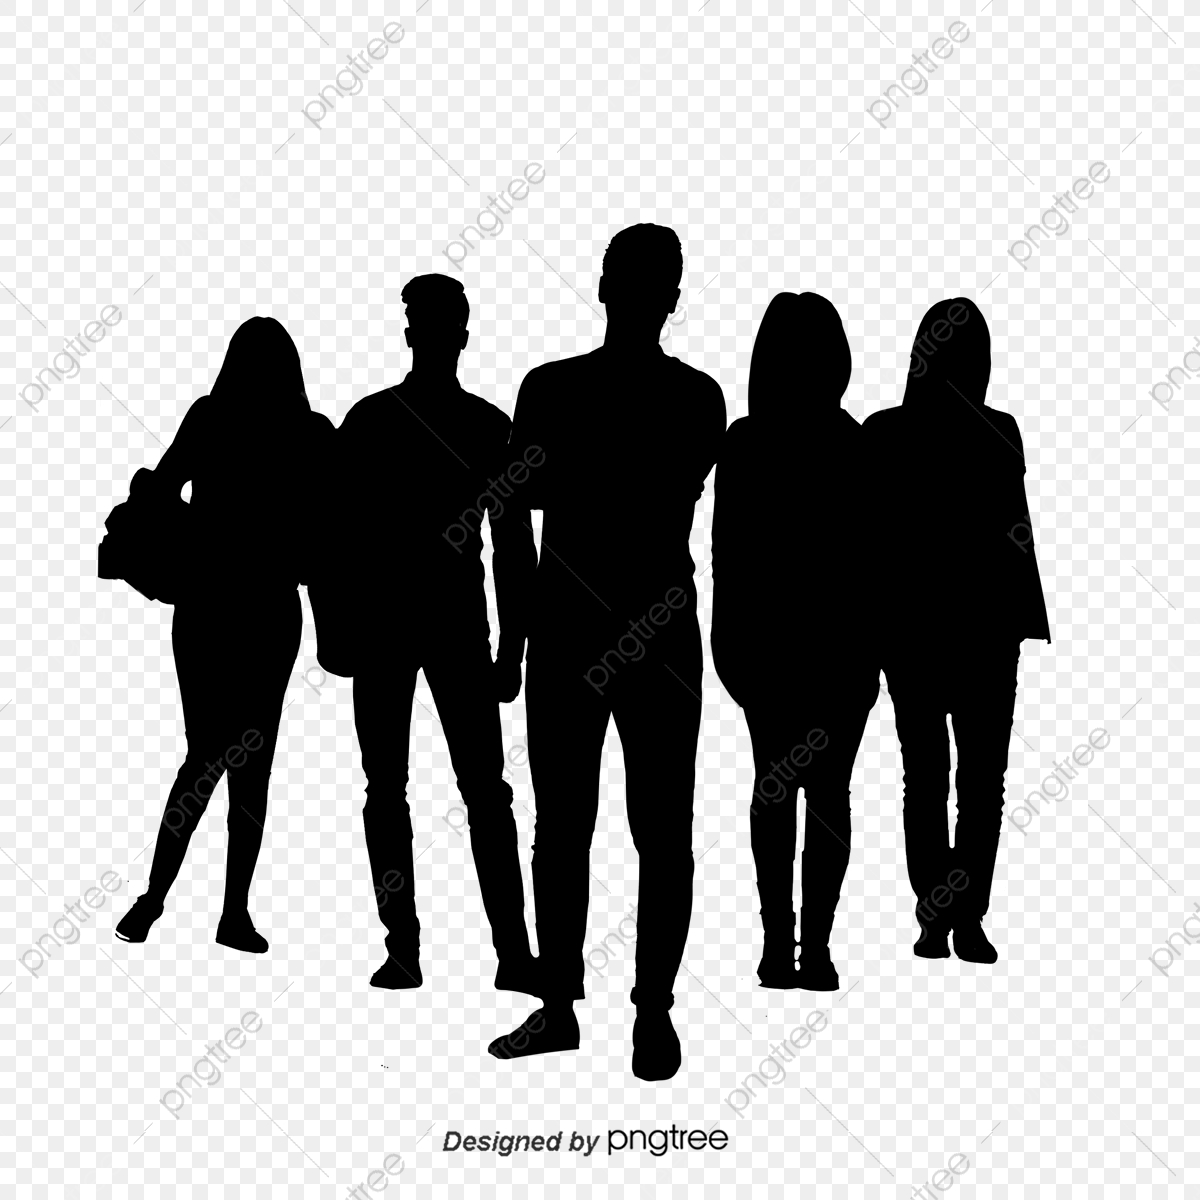 group clipart silhouette